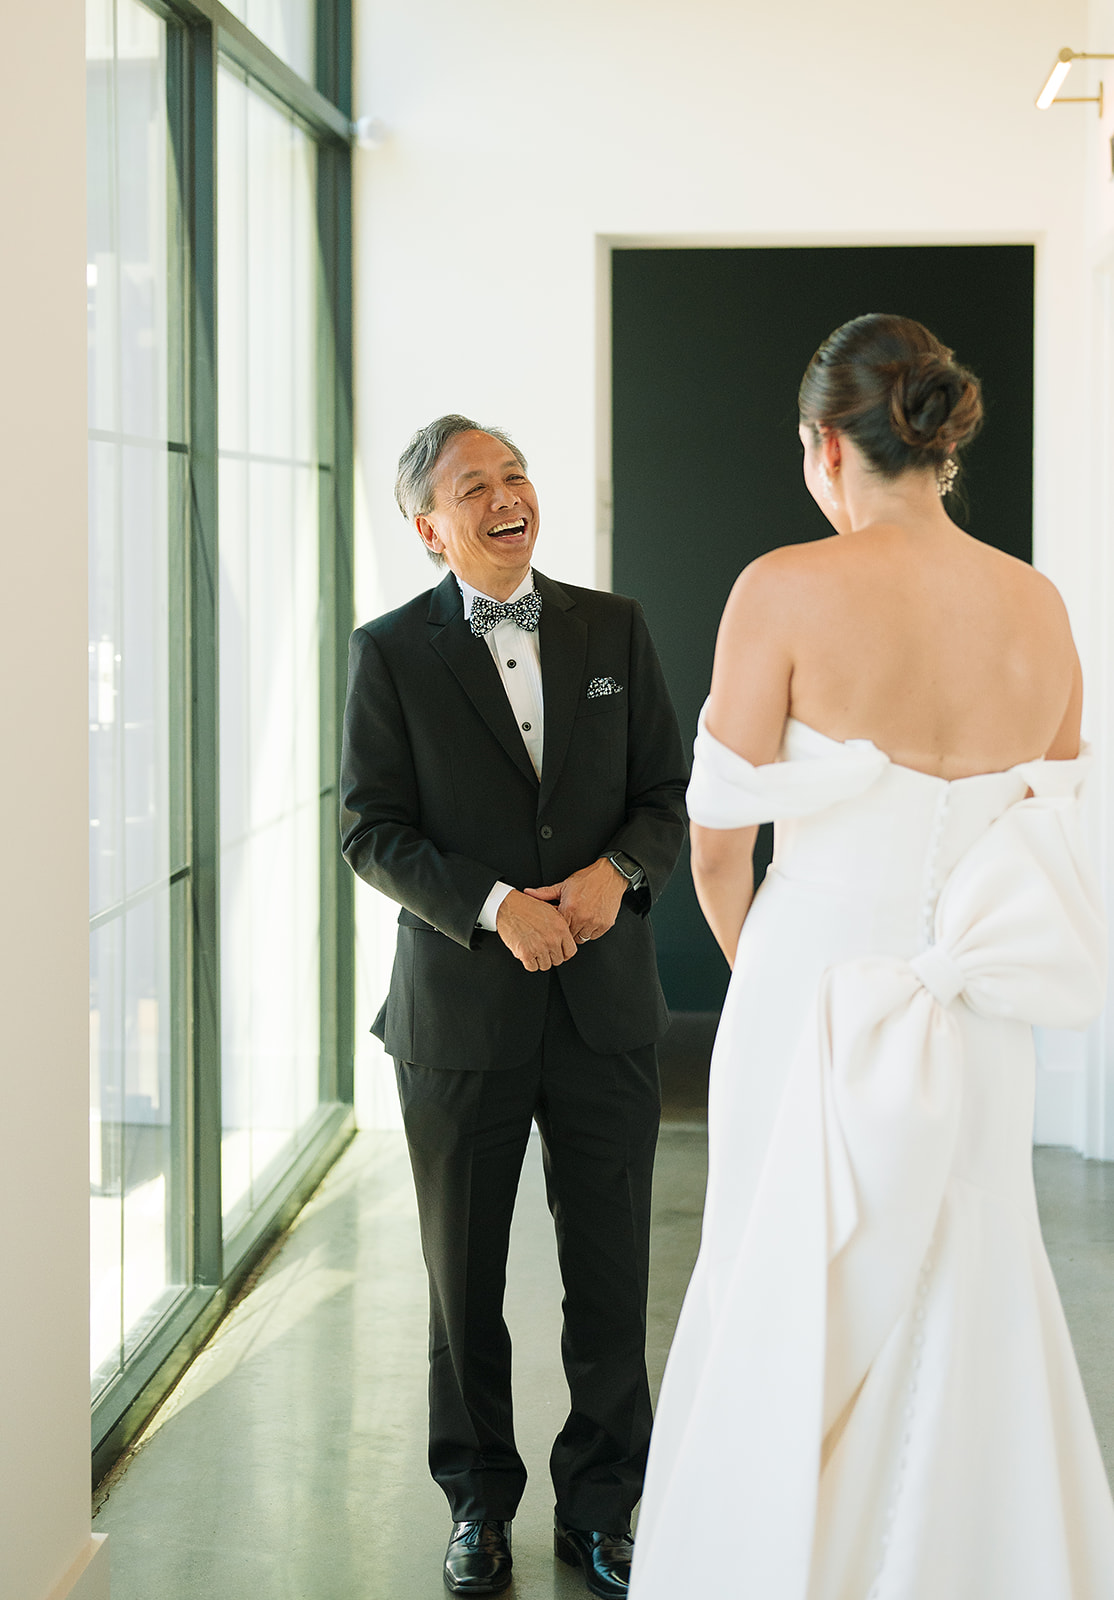 A father in a black suit laughs and smiles while during his first look with his daughter